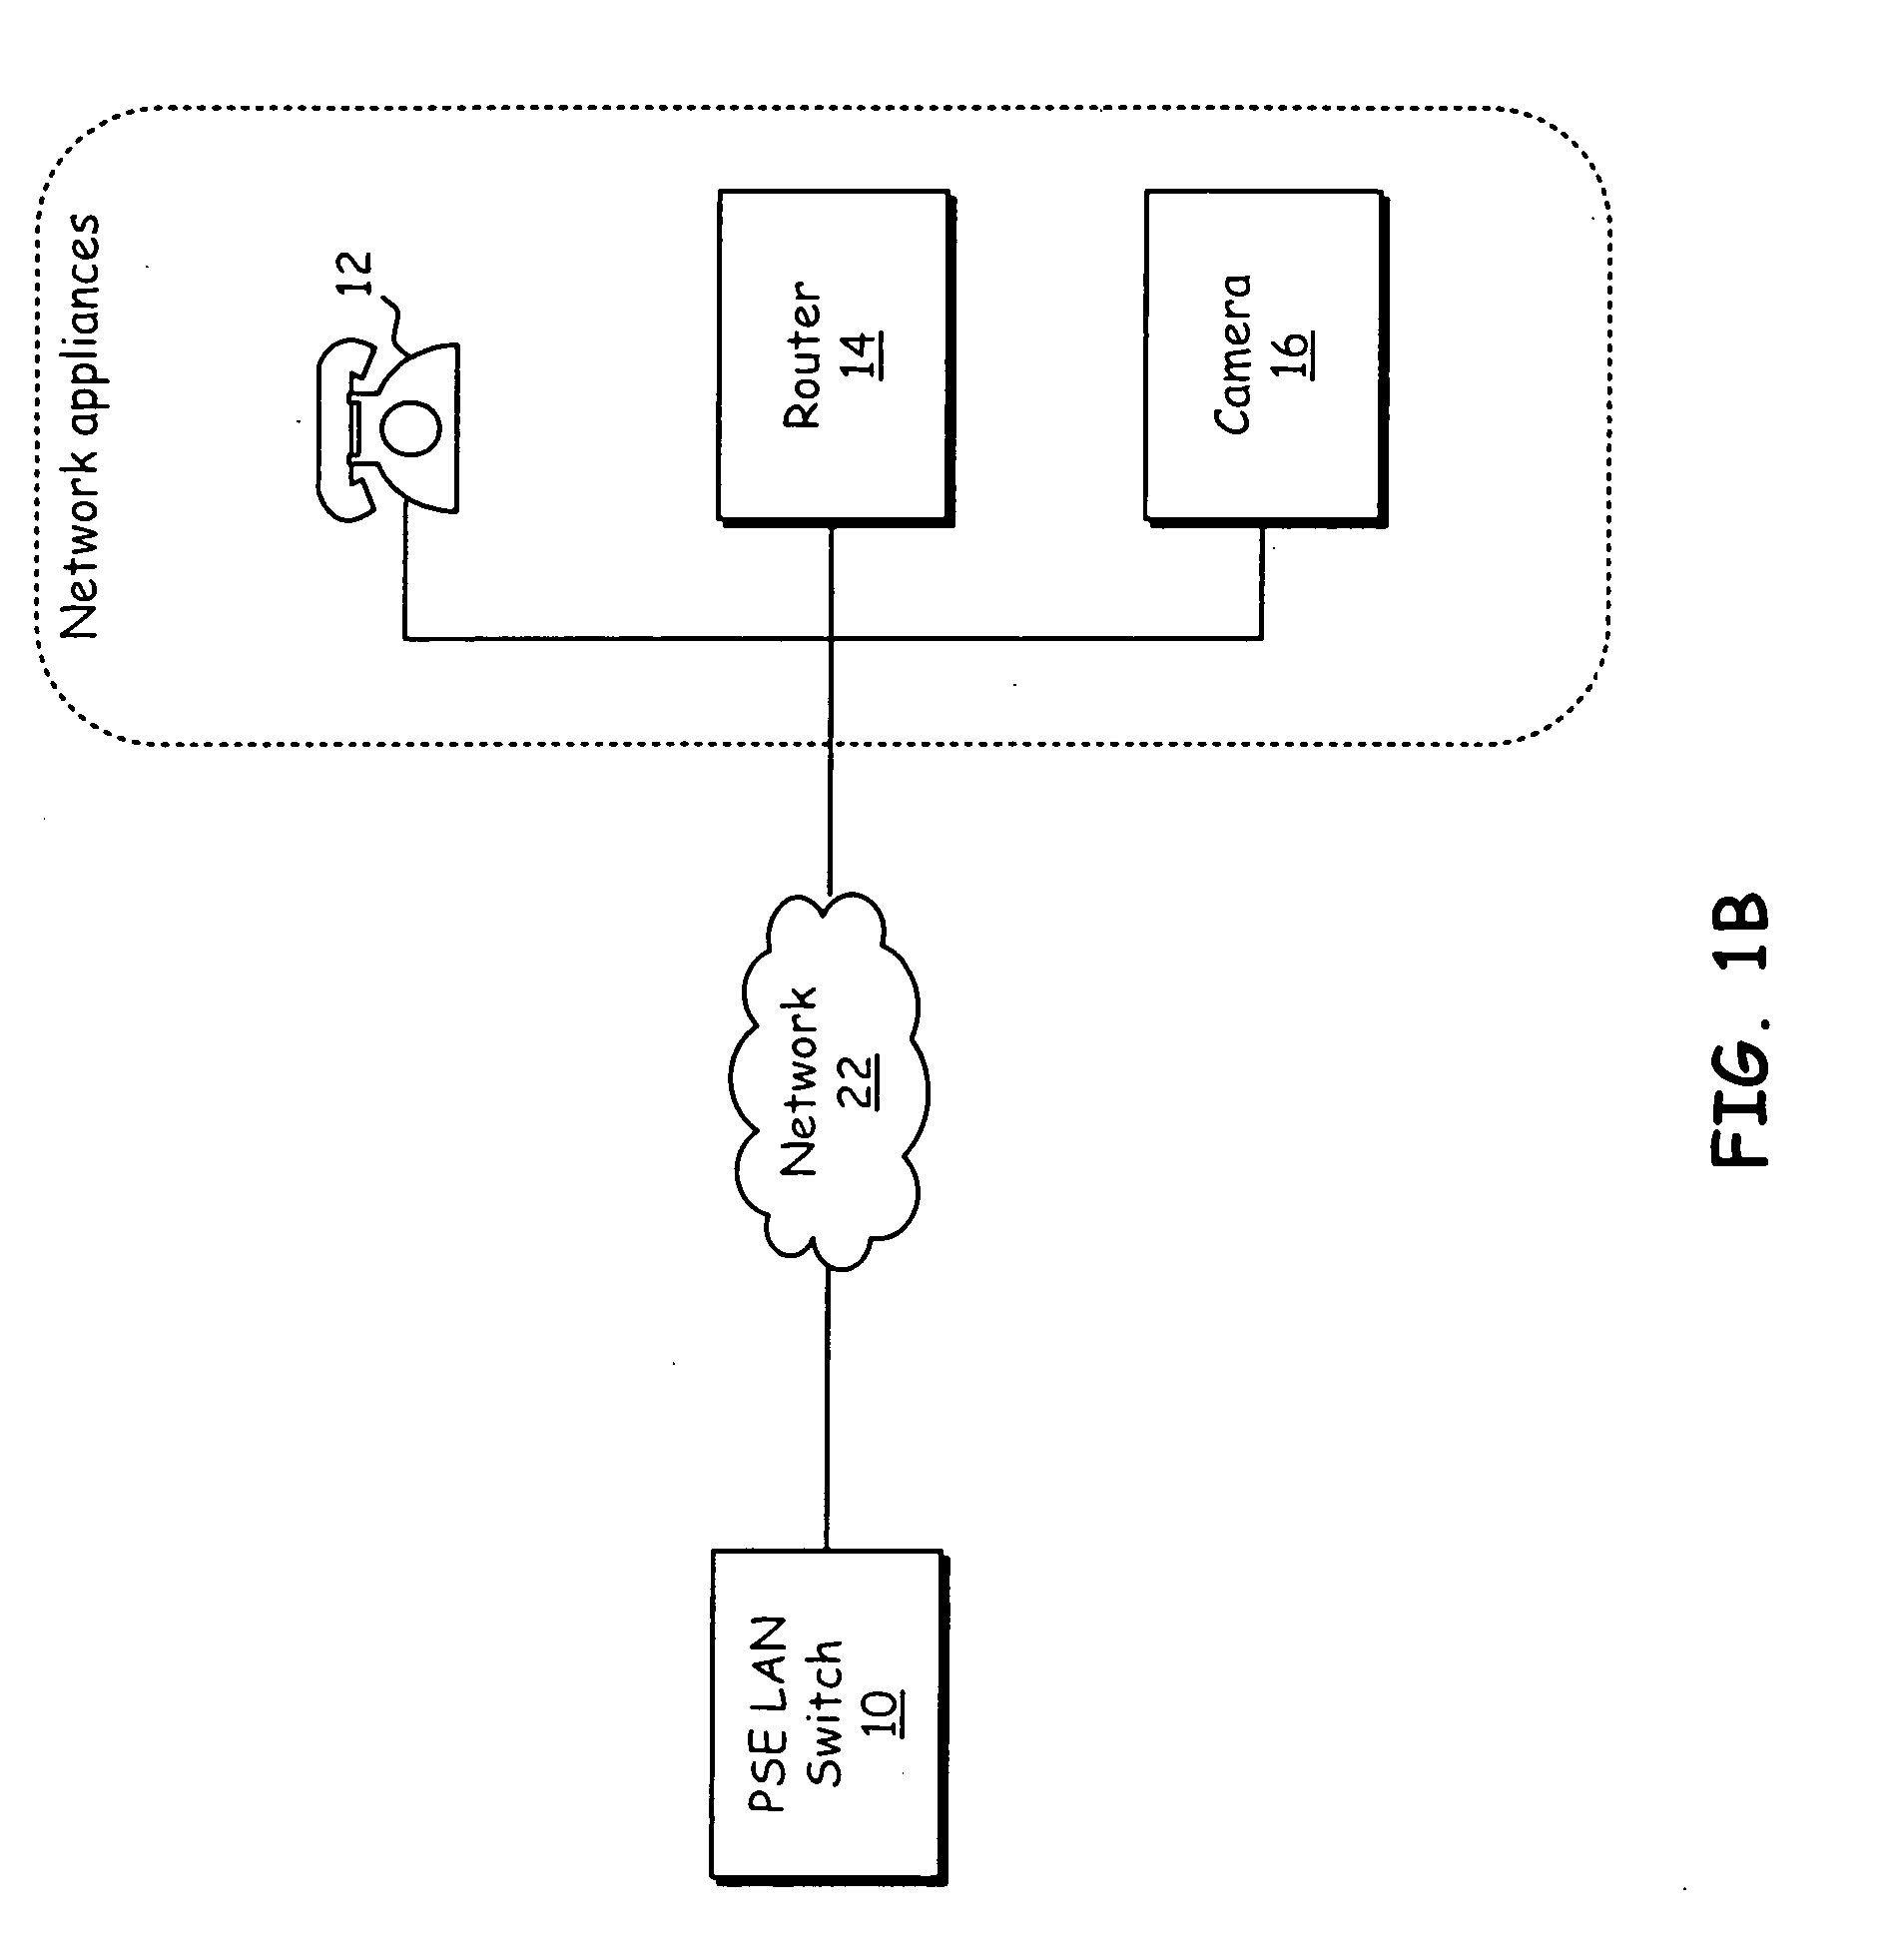 Solid state transformer-less method to feed high bandwith data and power signals from a network attached power sourcing device